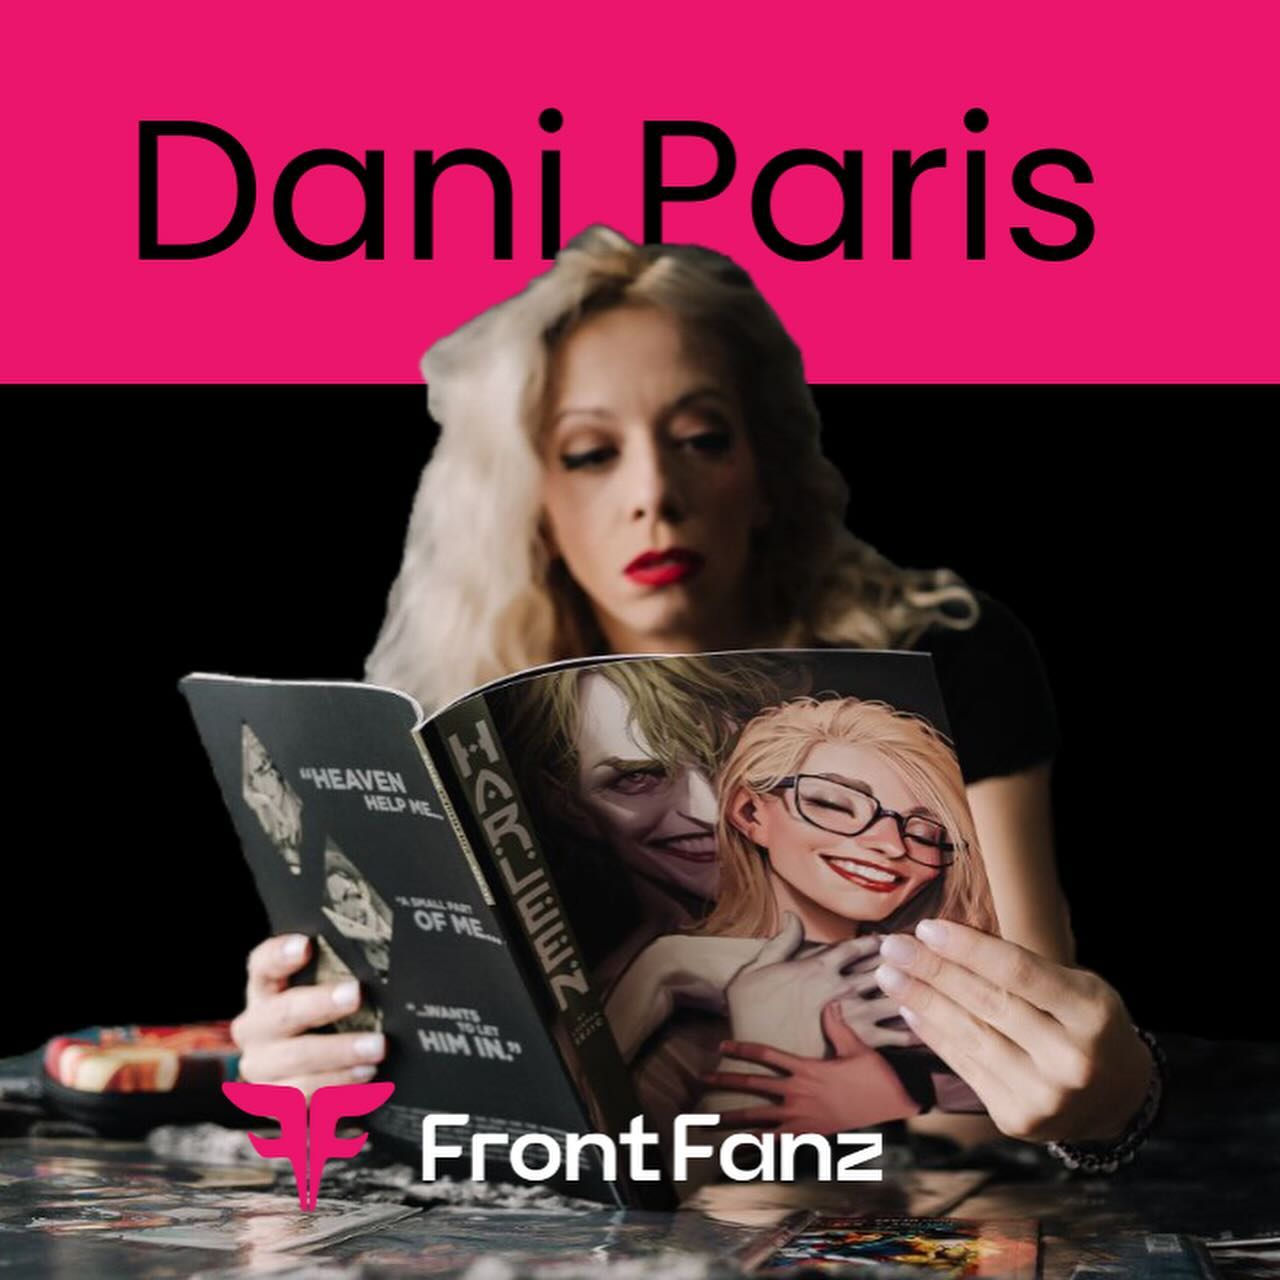 I’m a mentor for the FanXFactor Streaming competition! Currently on the team I have @dani.paris2020 & Brittanybitch4u! If you are interested in joining the platform as a live streamer & want my mentorship, hmu! I got a referral link for you 😘🎶